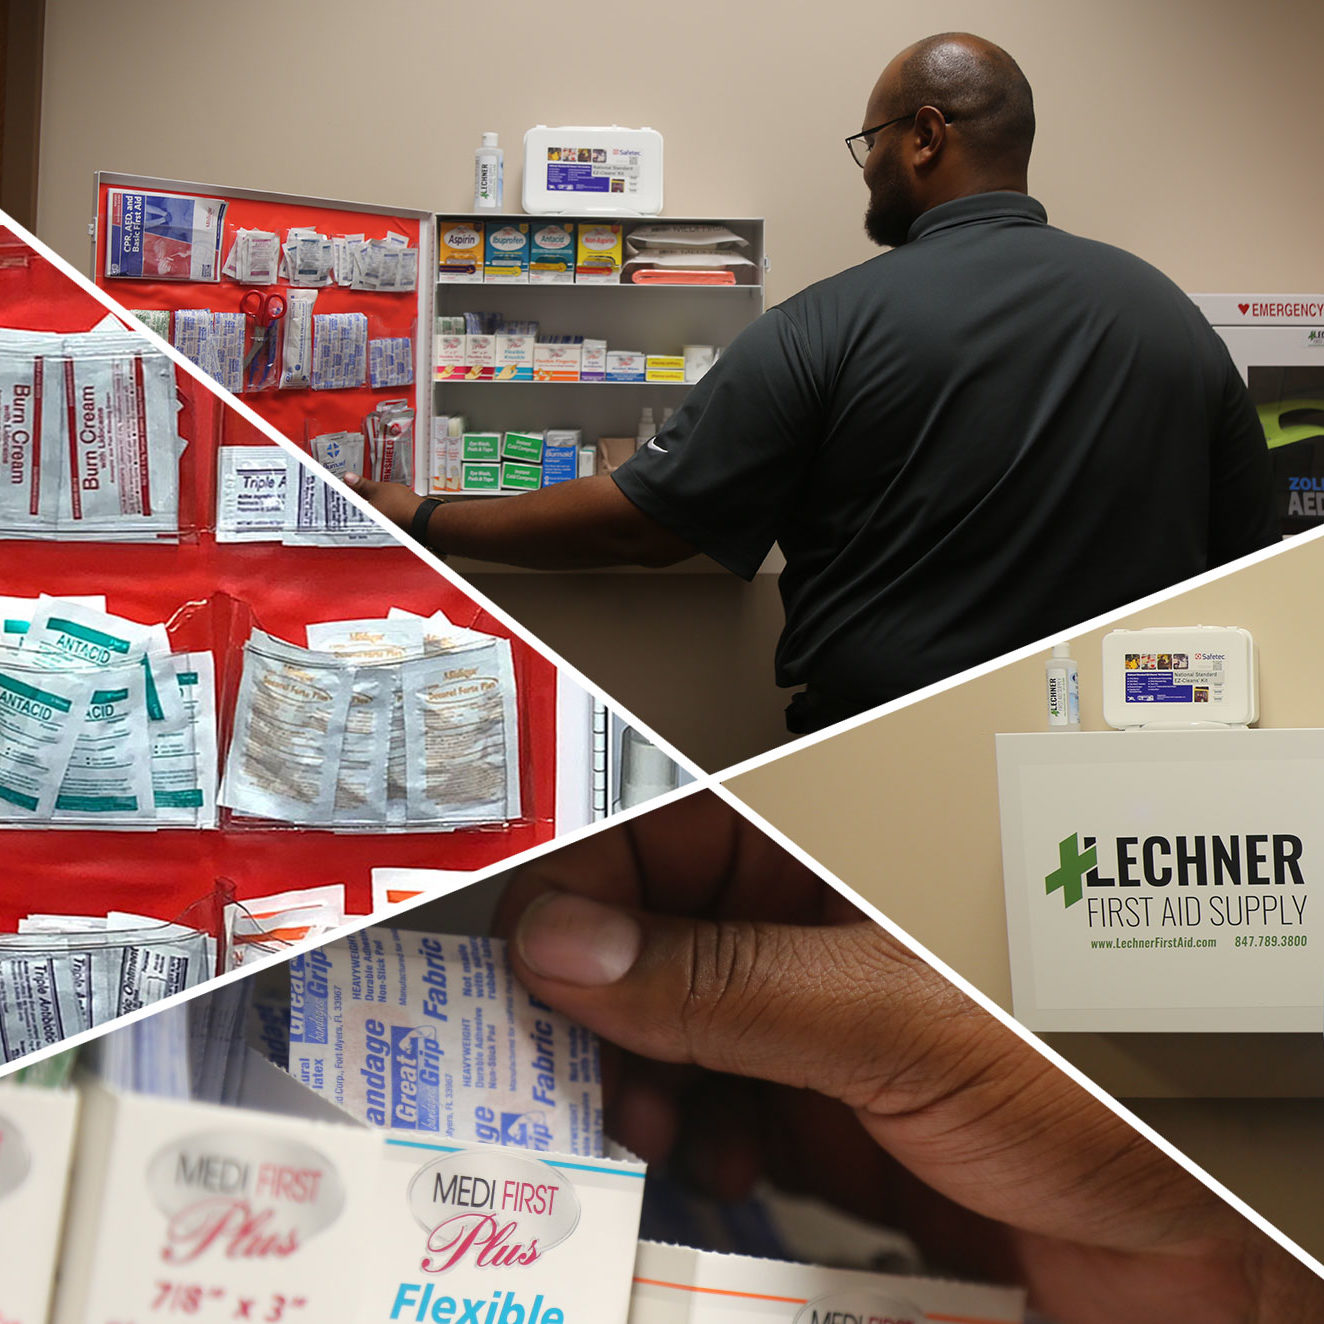 Lechner First Aid Supply cabinets with burn cream, bandages and employee comfort items